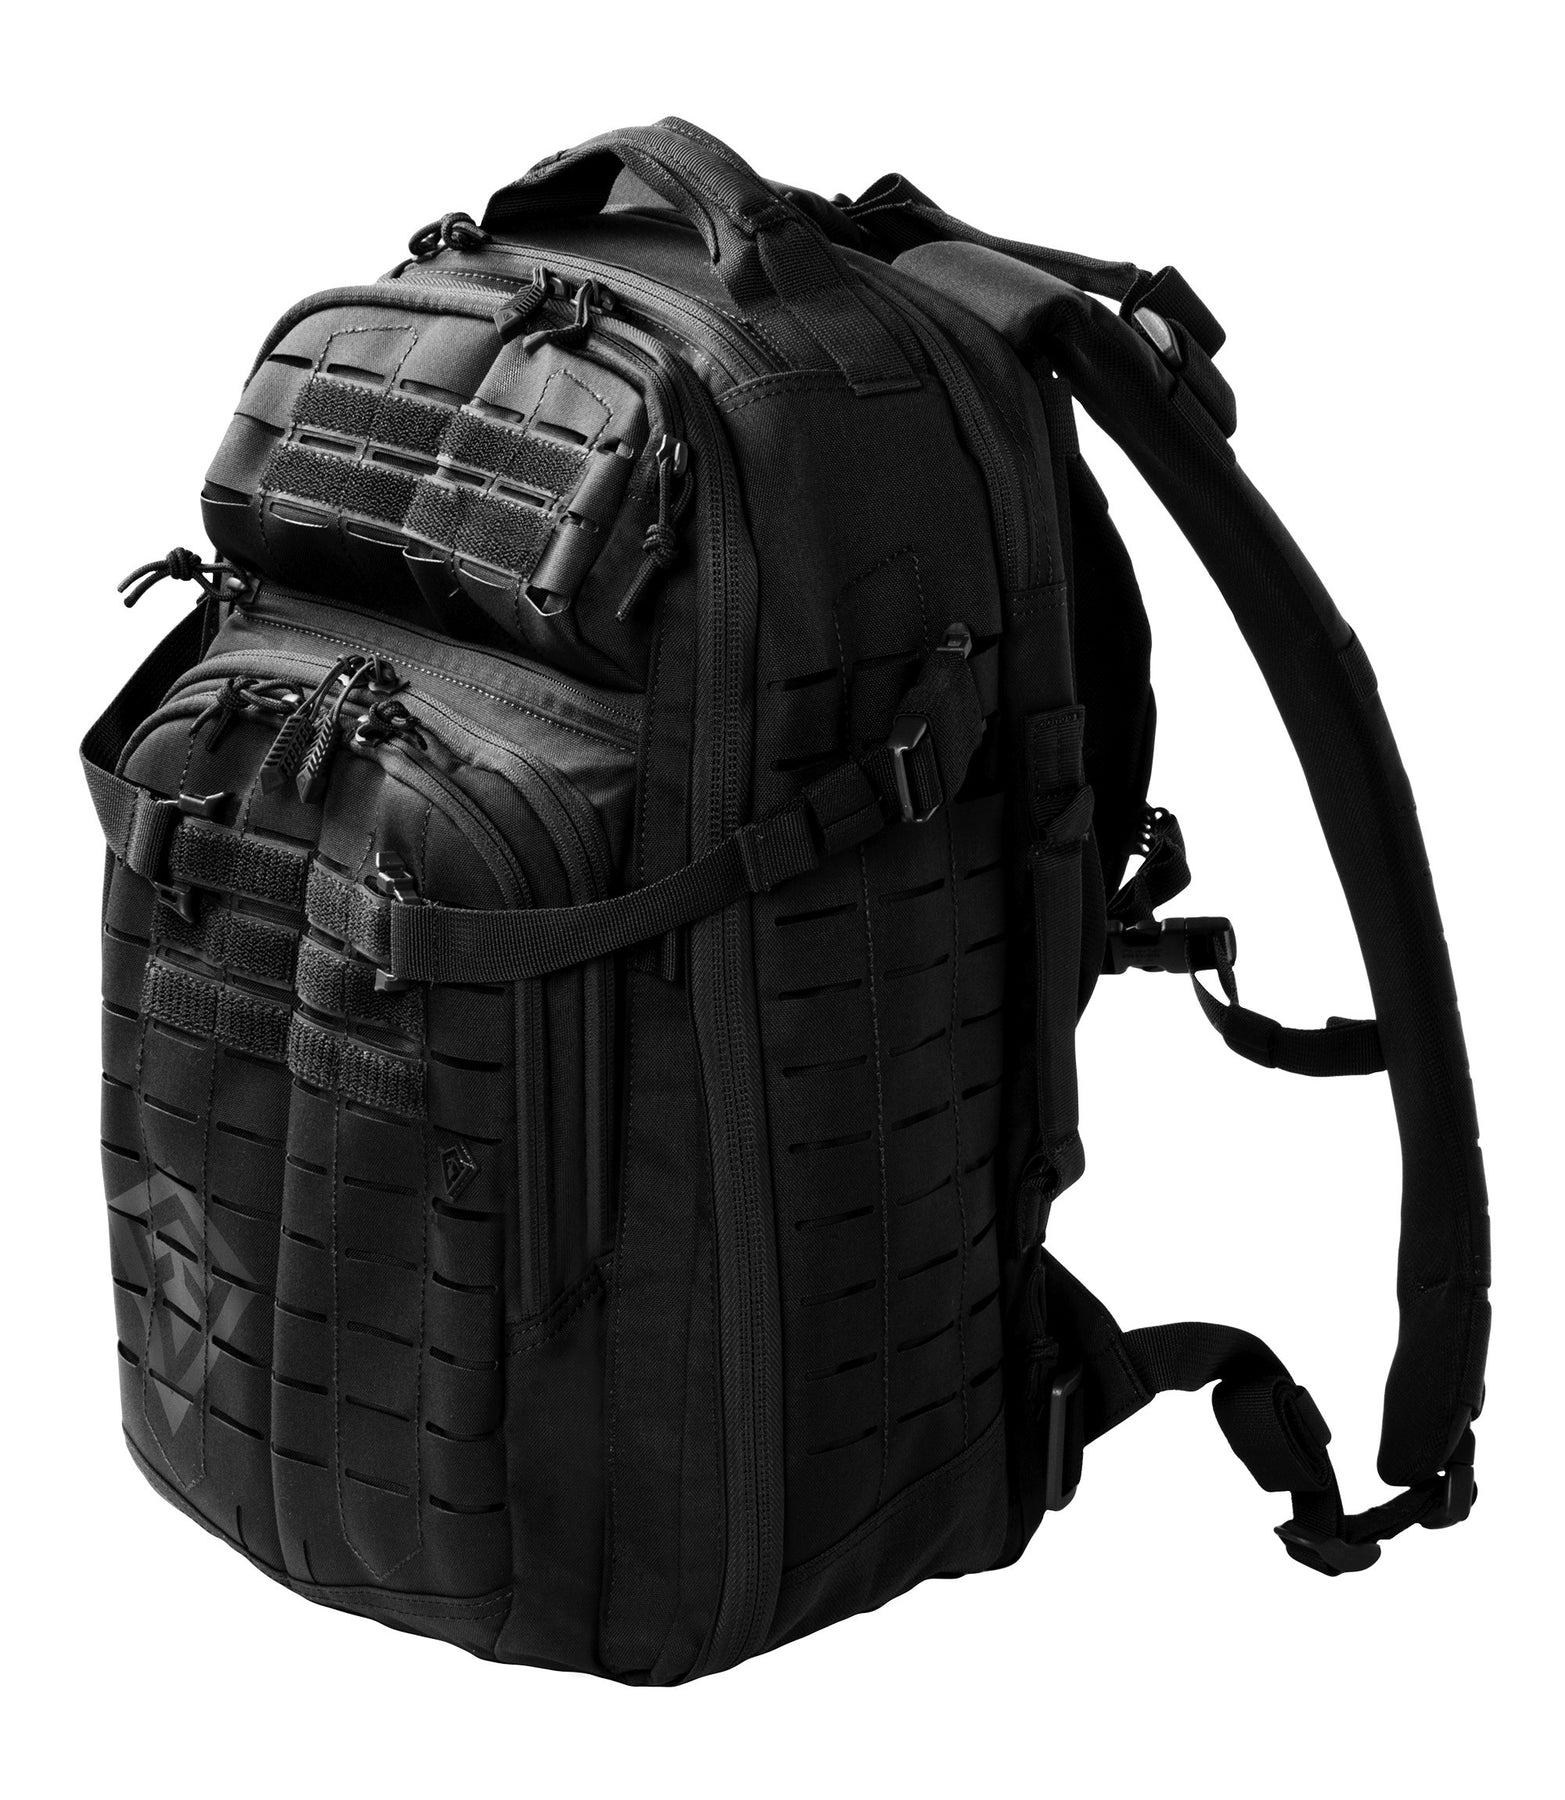 First Tactical Backpacks - Molle 1 & 3 Day Backpacks & Sling Packs